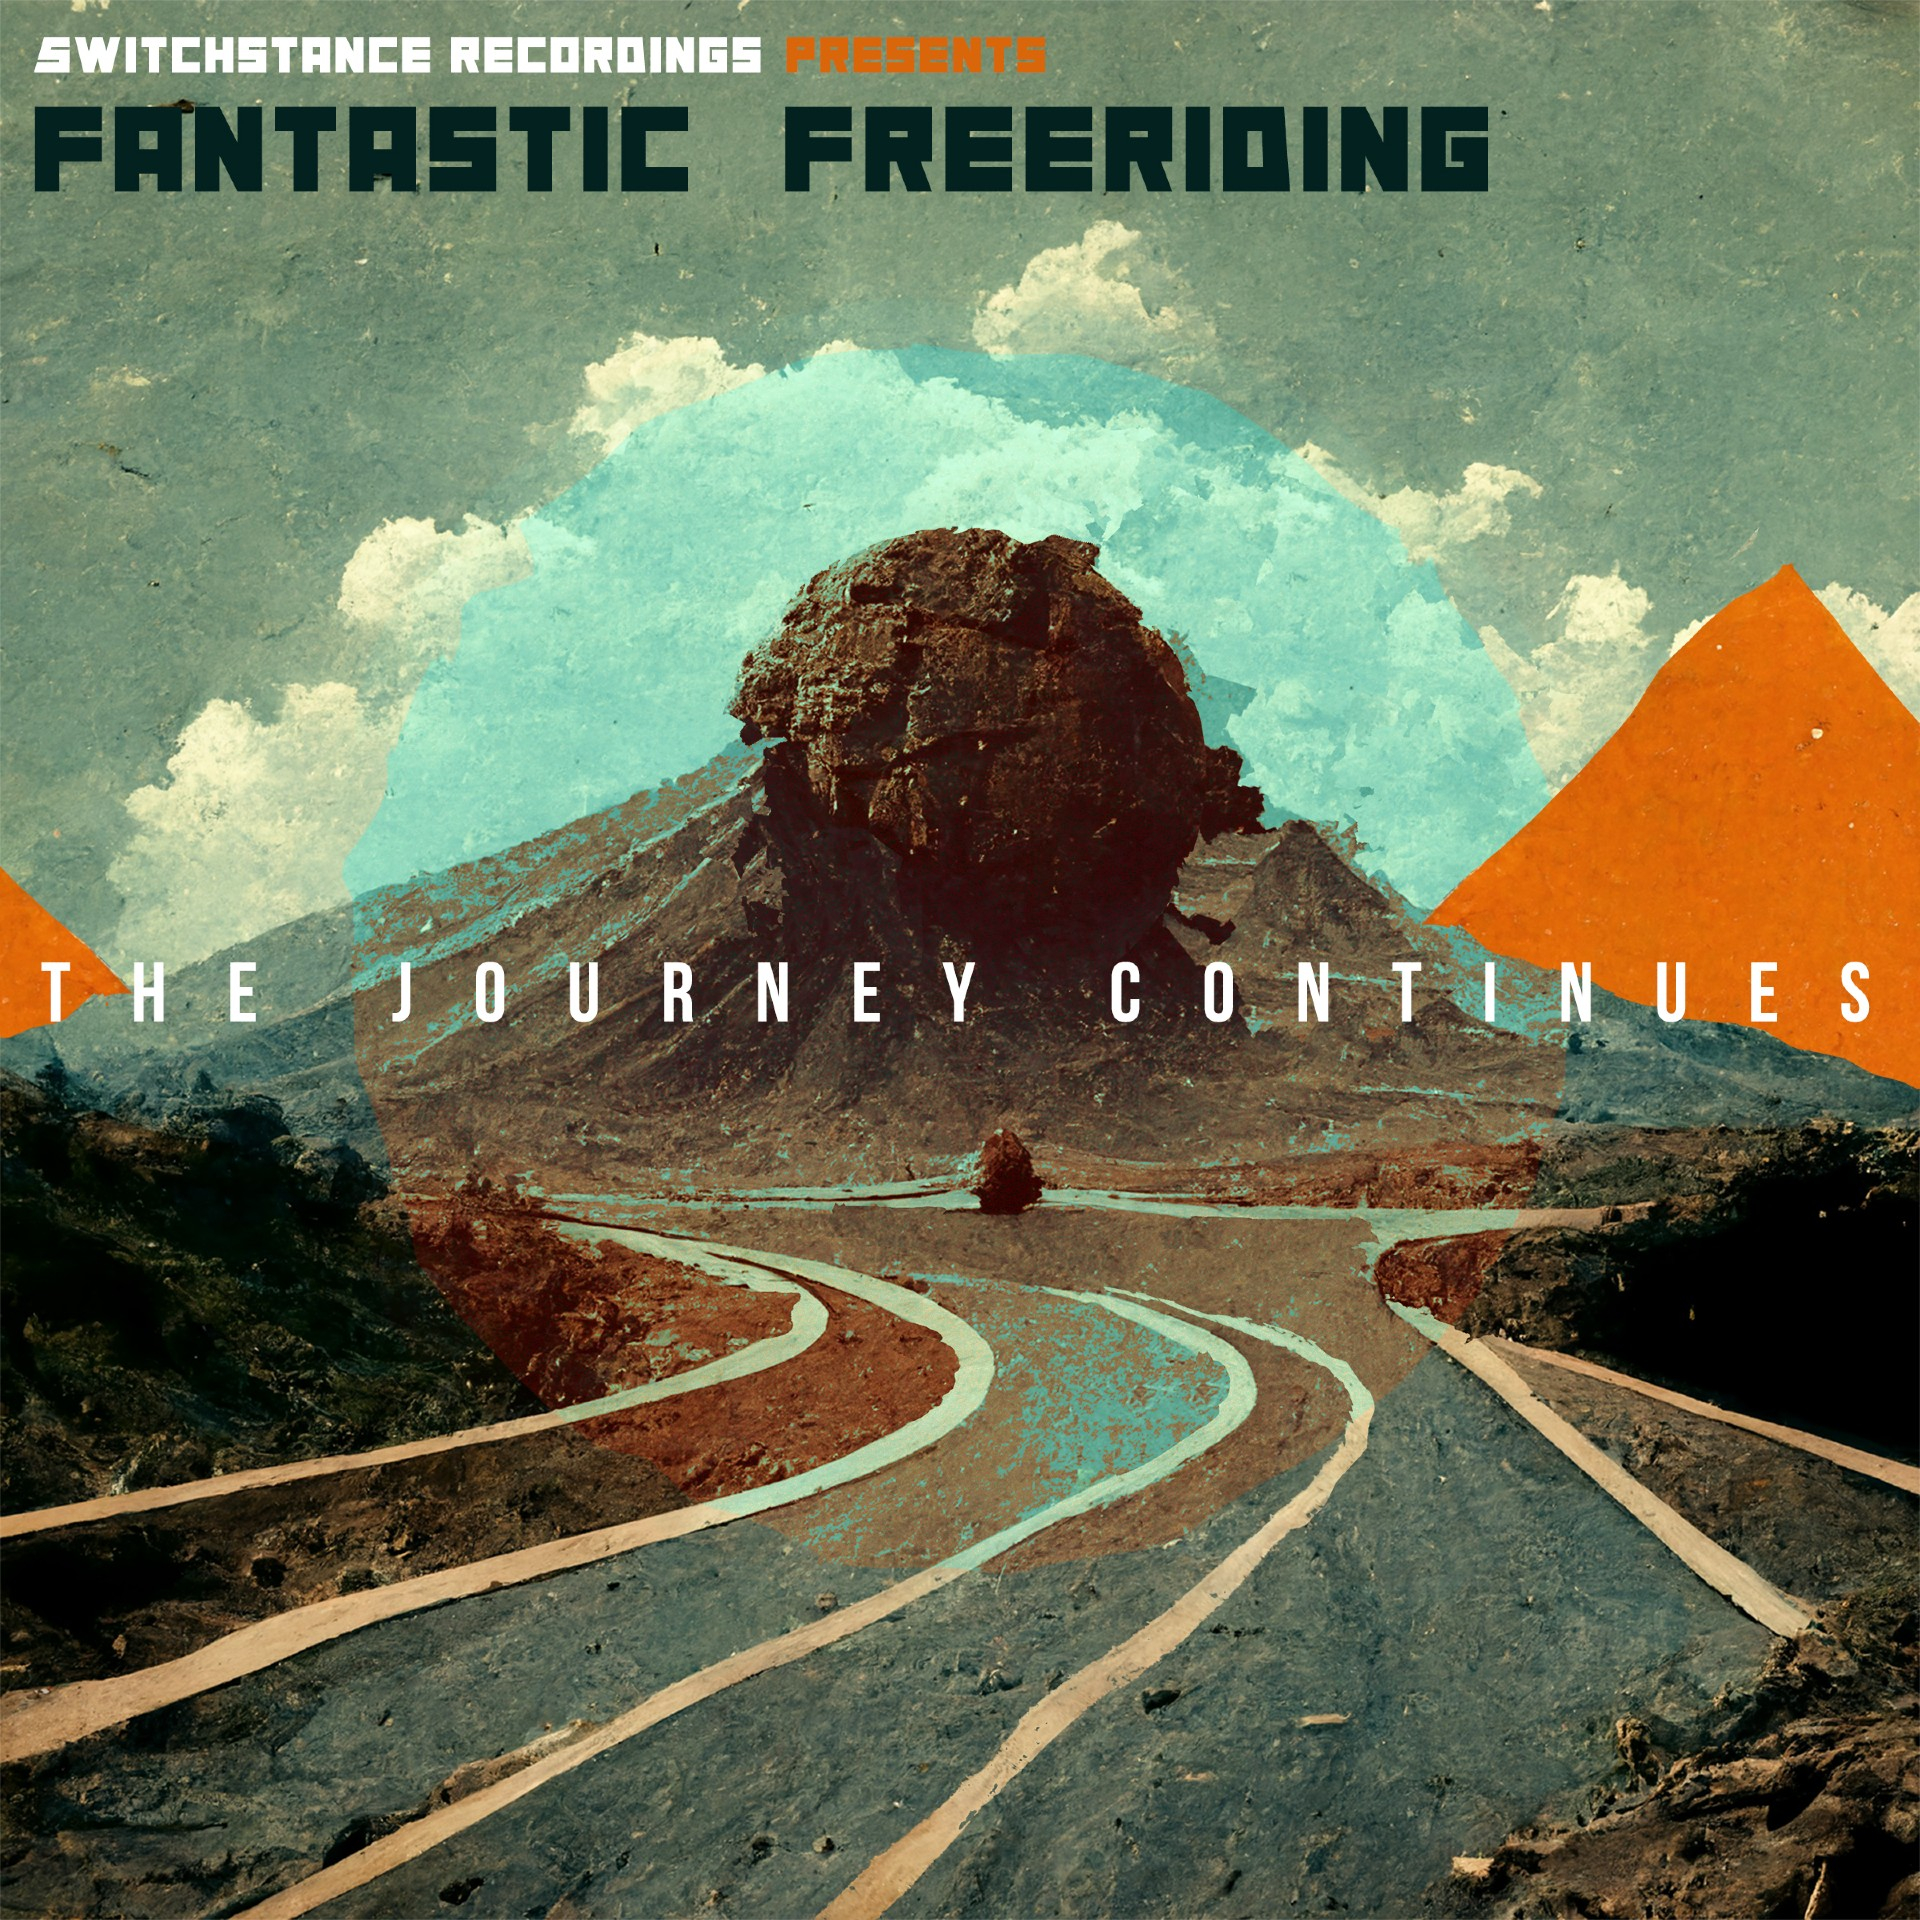 Fantastic Freeriding – The Journey Continues